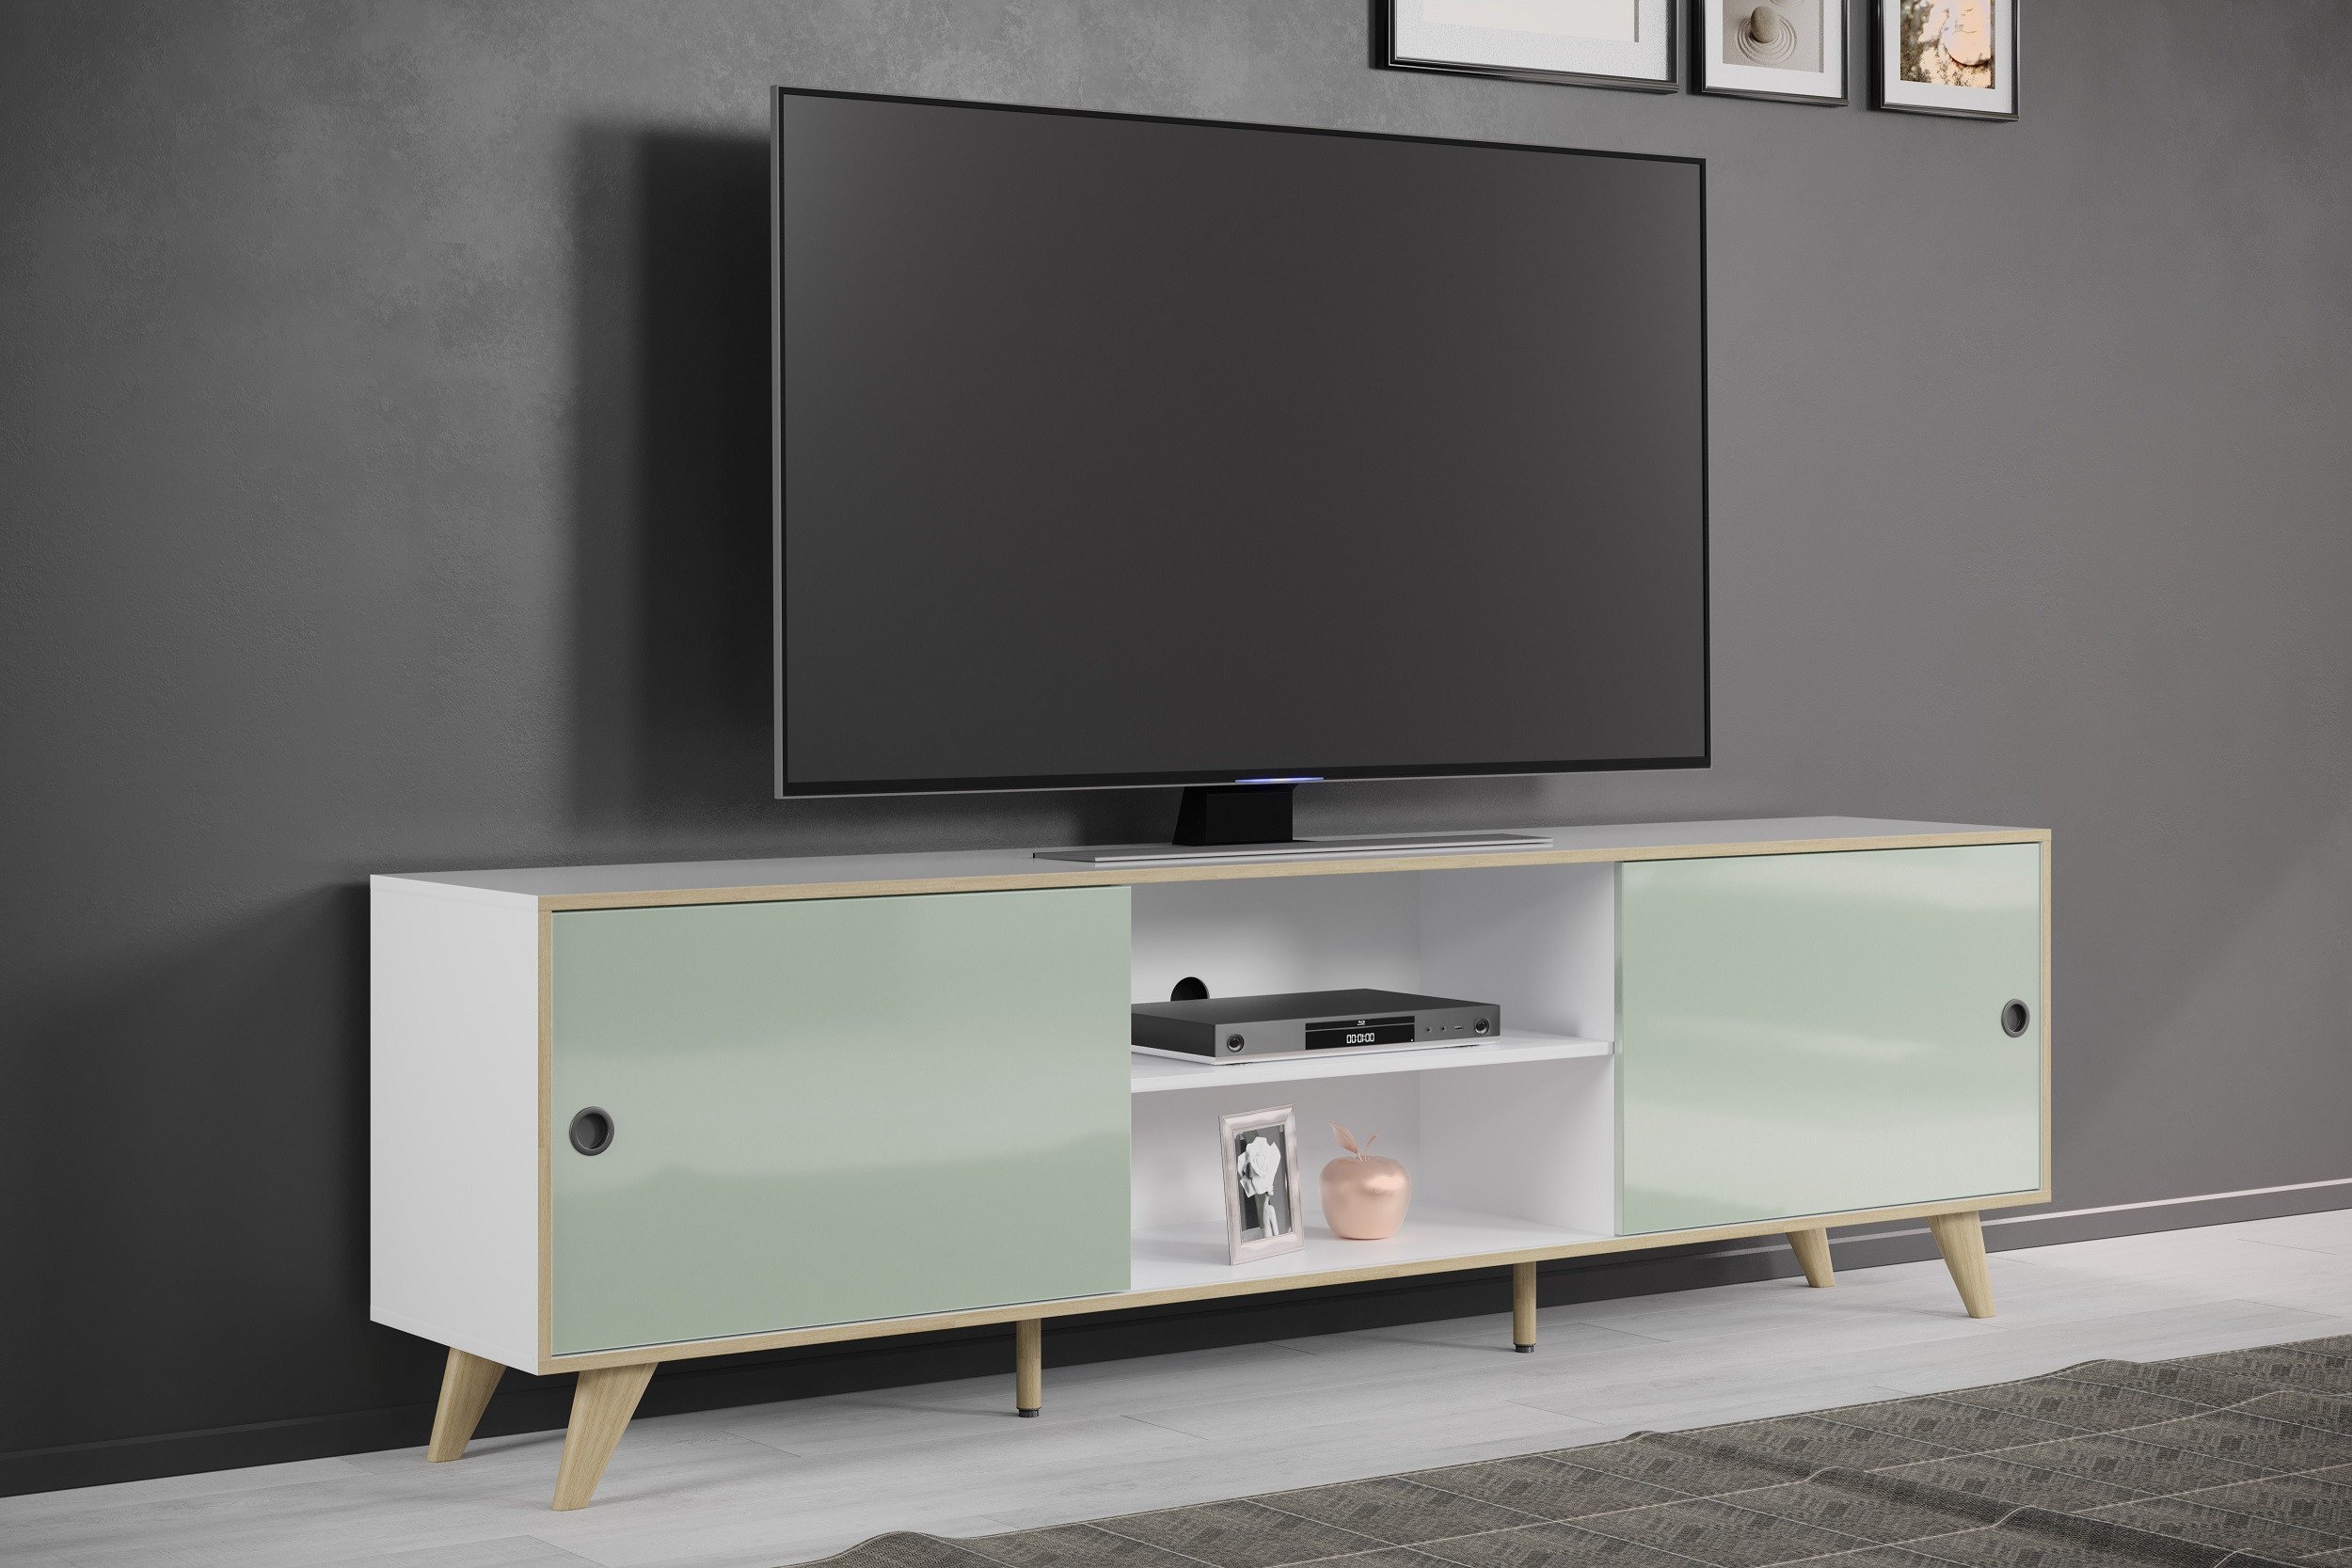 Adele 217cm TV Stand in White and Green High Gloss Lacquer Finish